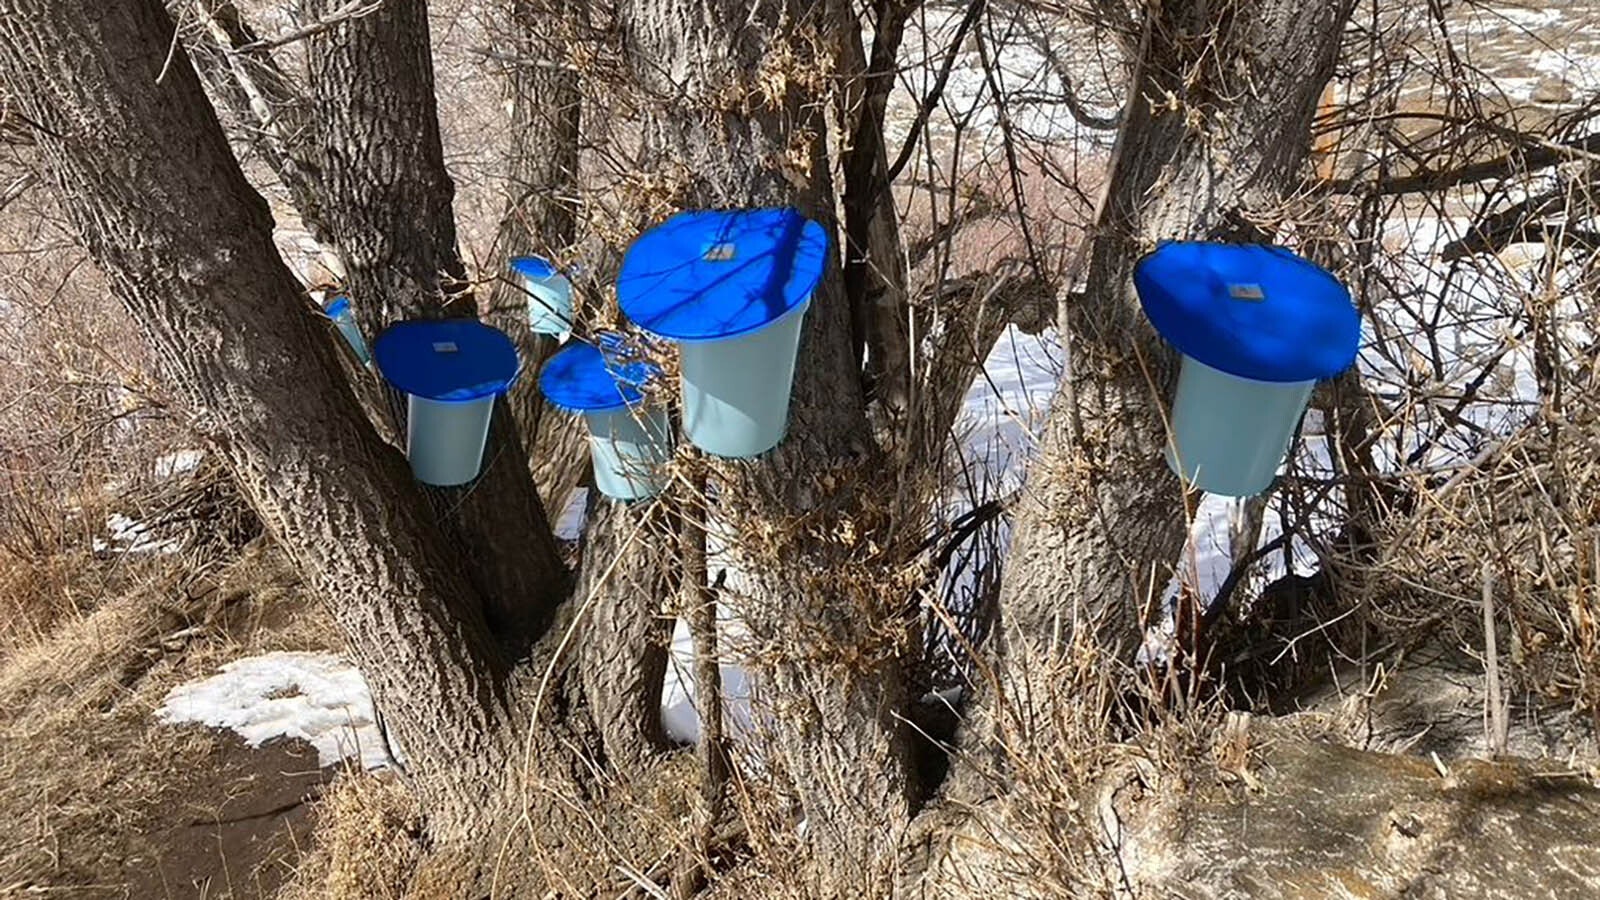 A stand of Wyoming boxelder trees are tapped and collecting sap to make syrup.